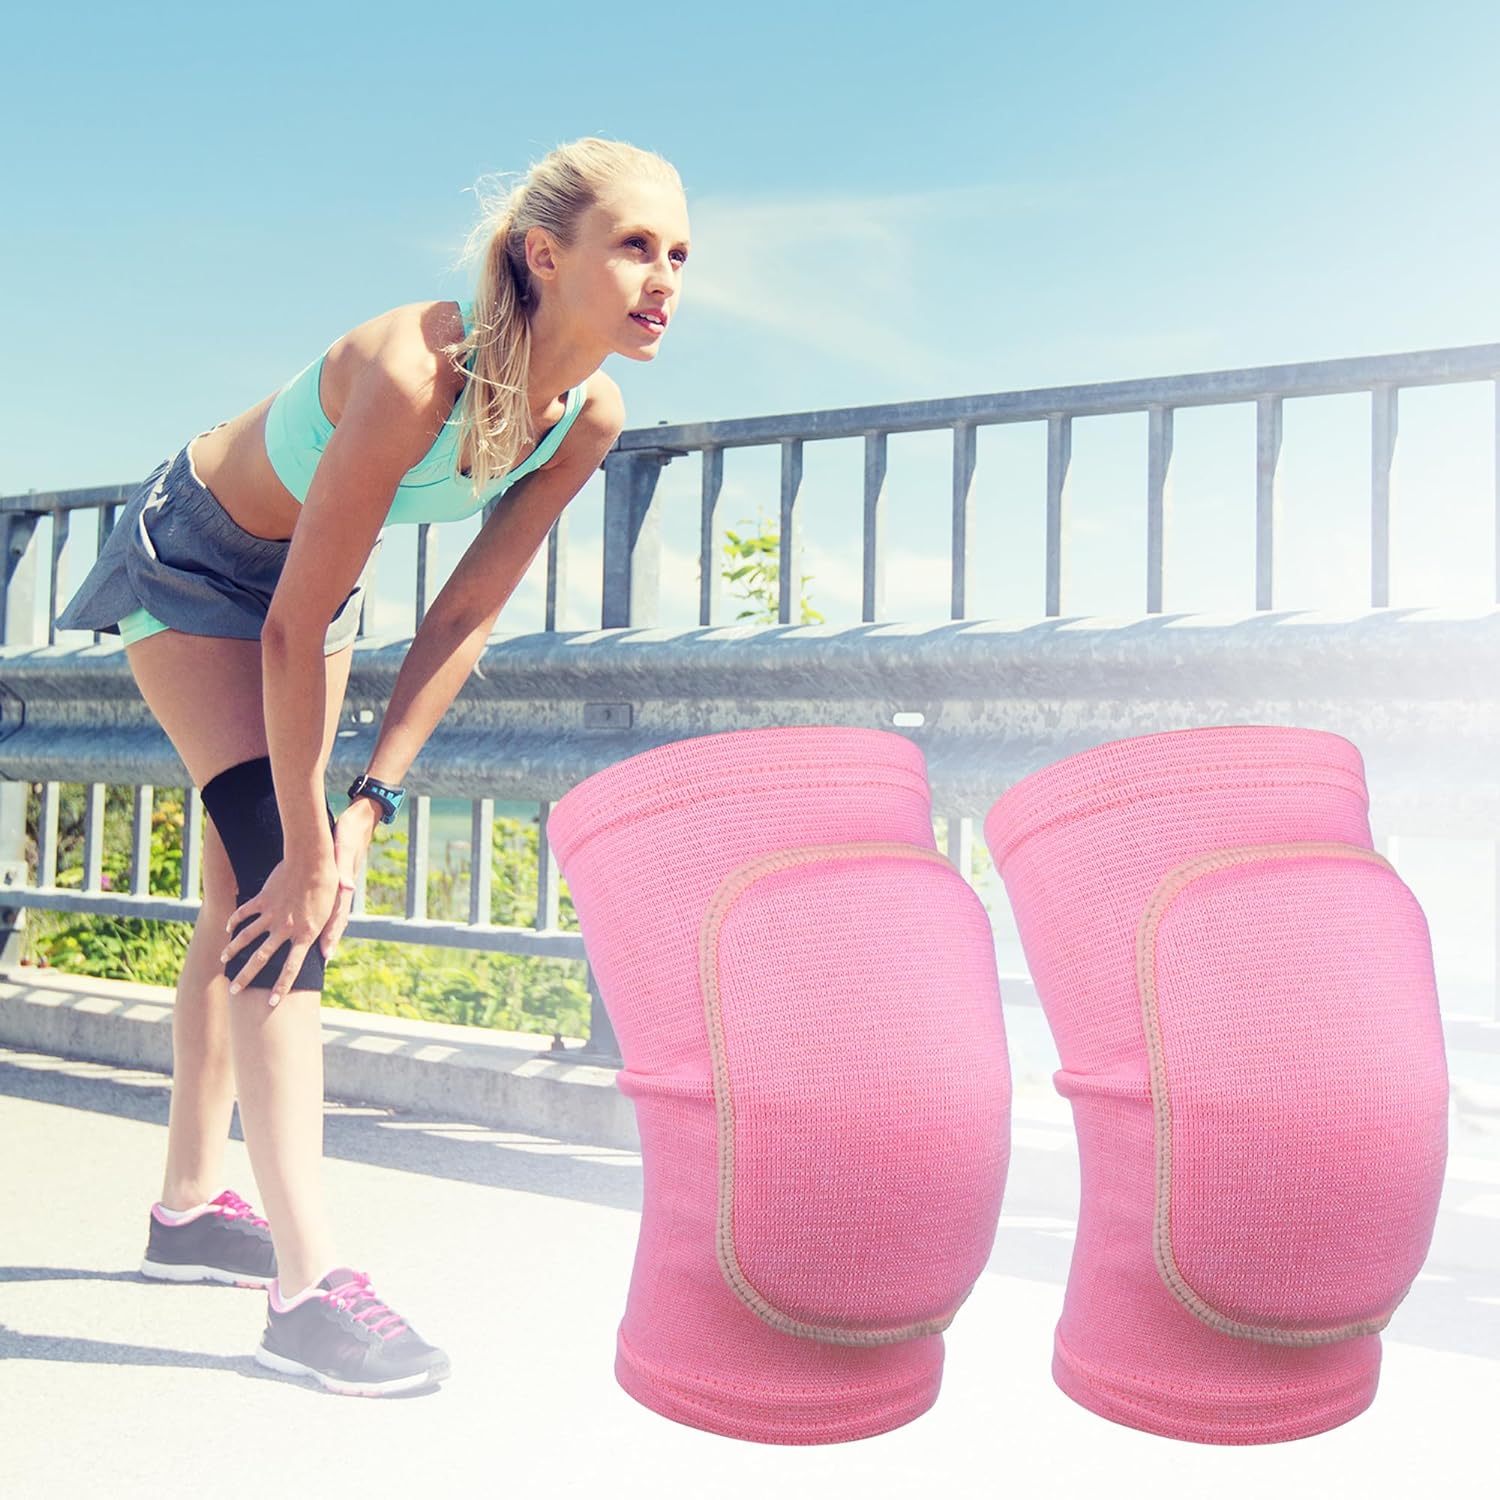 VOCOSTE 1 Pair Sporting Protective Knee Pad, Breathable Flexible Knee Support Compression Sleeve Brace, for Football Volleyball, Sponge, Pink Size S